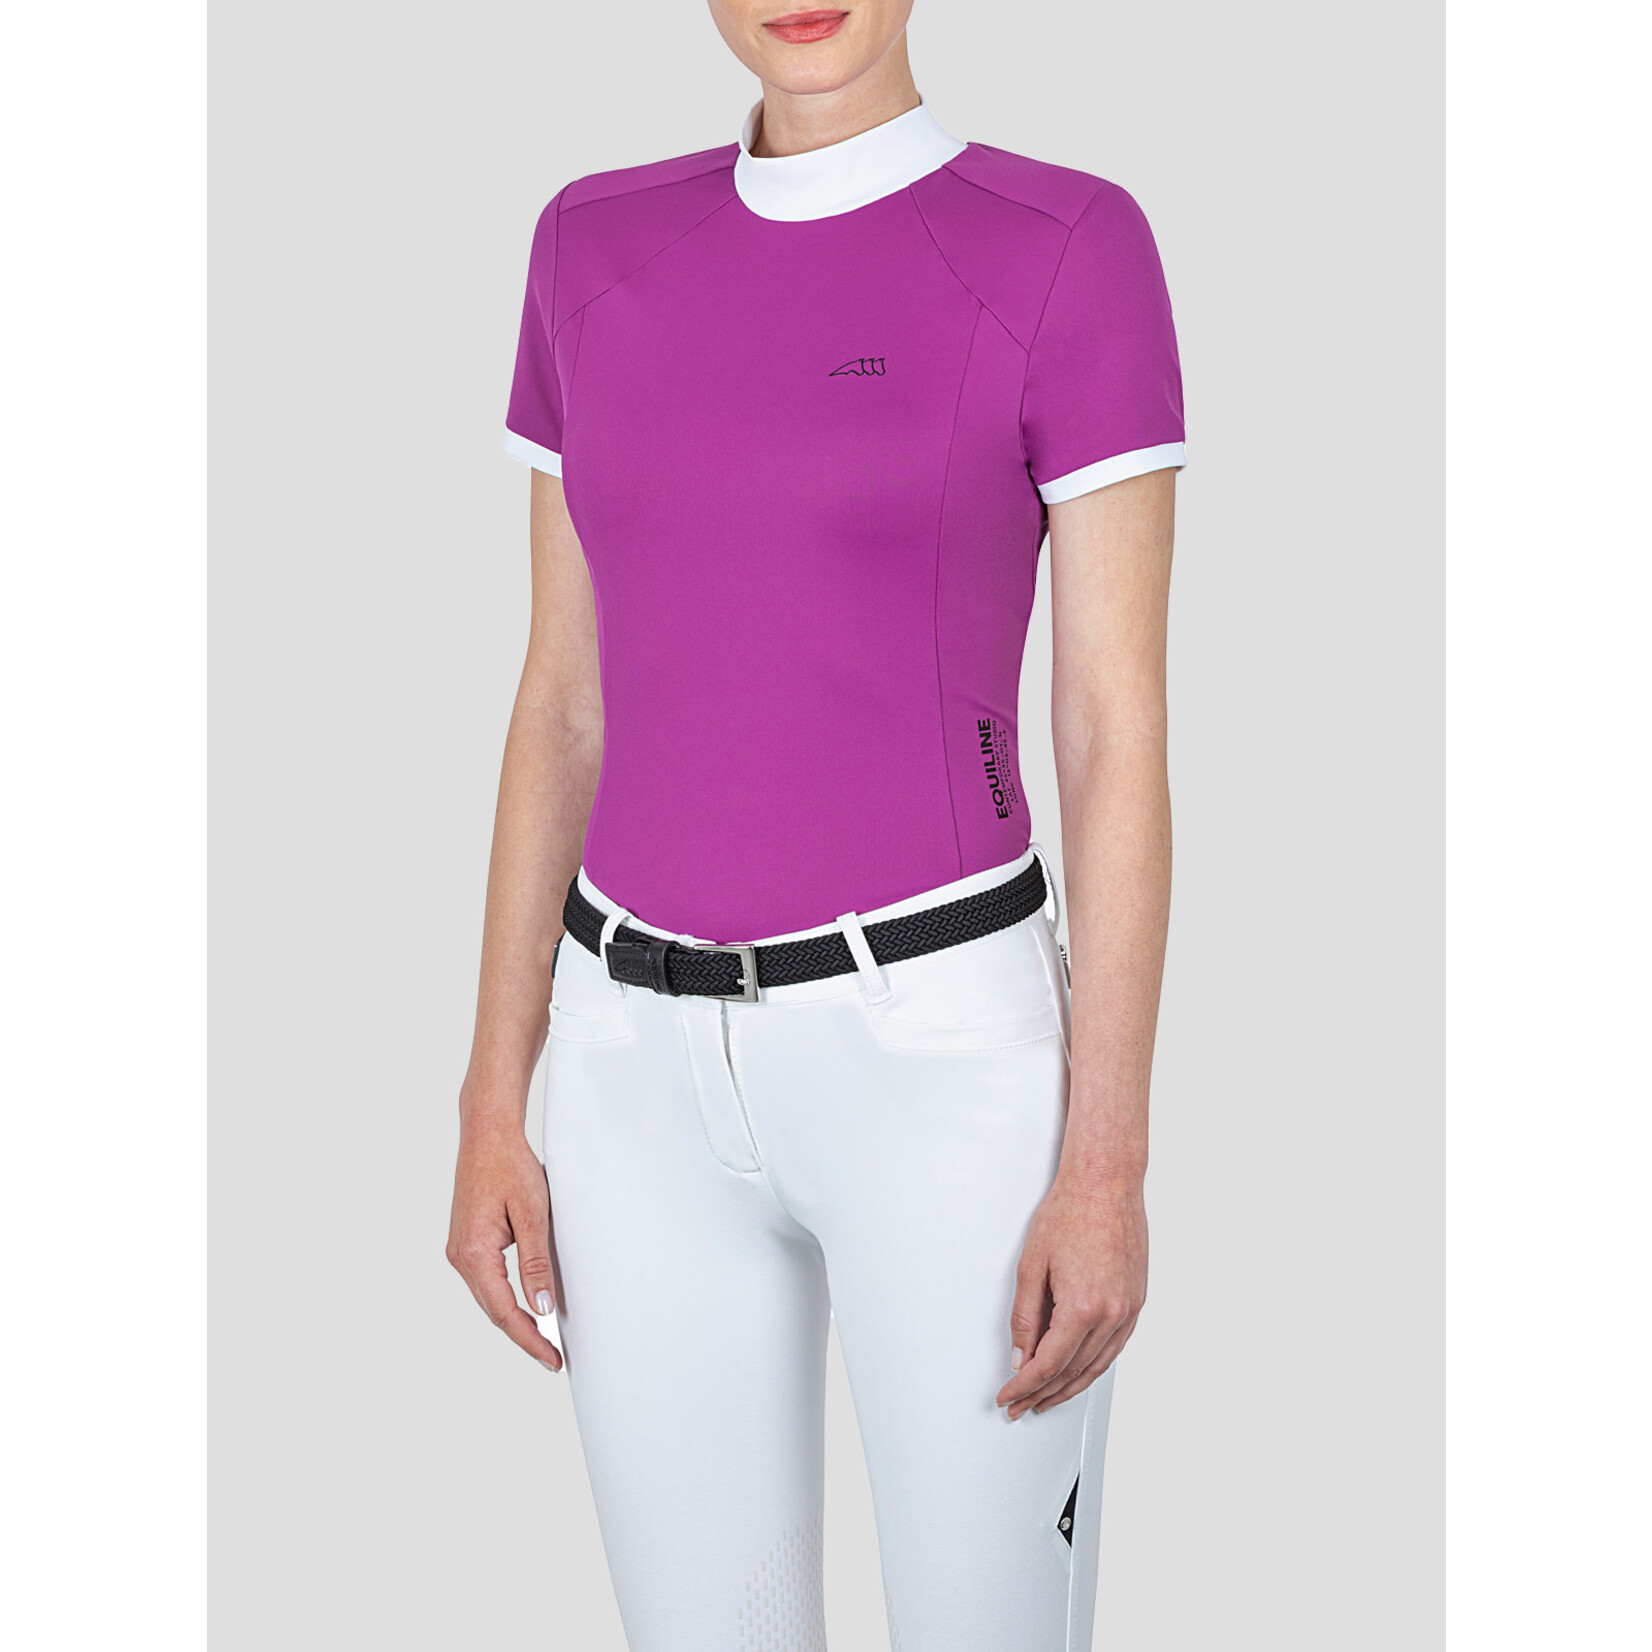 Equiline Equiline Cyanc Women's Stretch Show Shirt